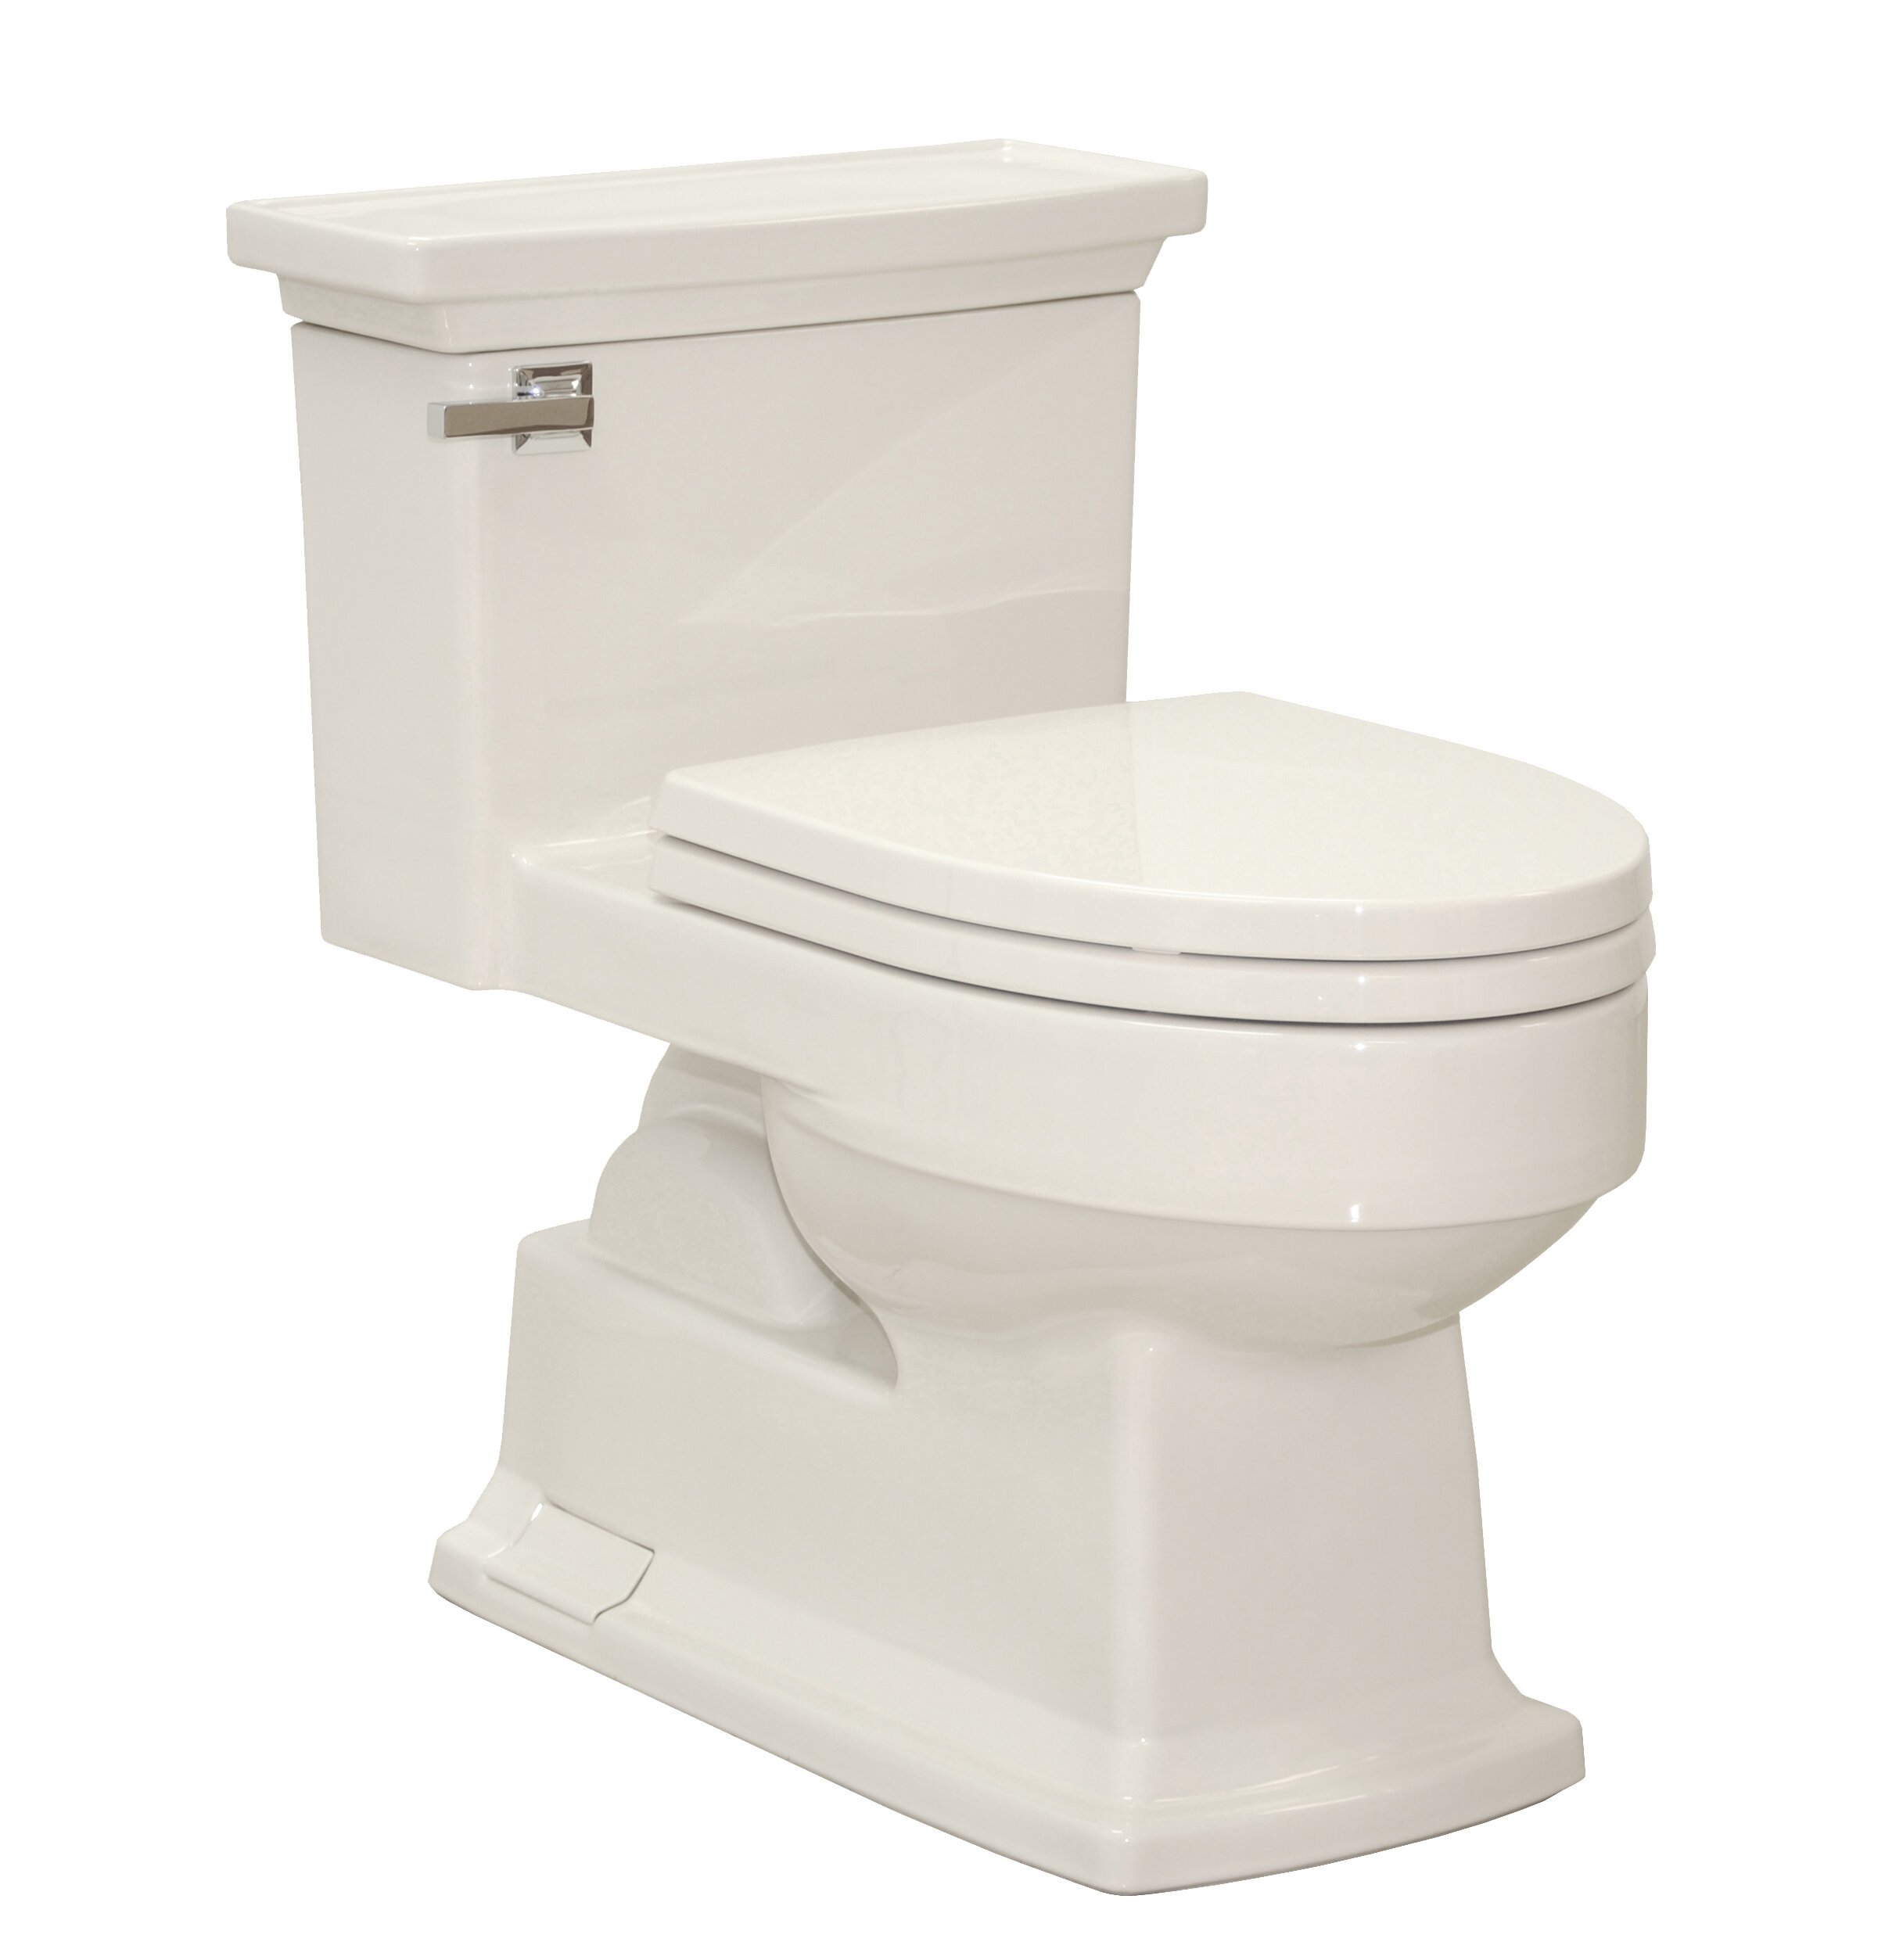 Toto Lloyd Eco 1 28 Gpf Elongated One Piece Toilet Seat Included Wayfair